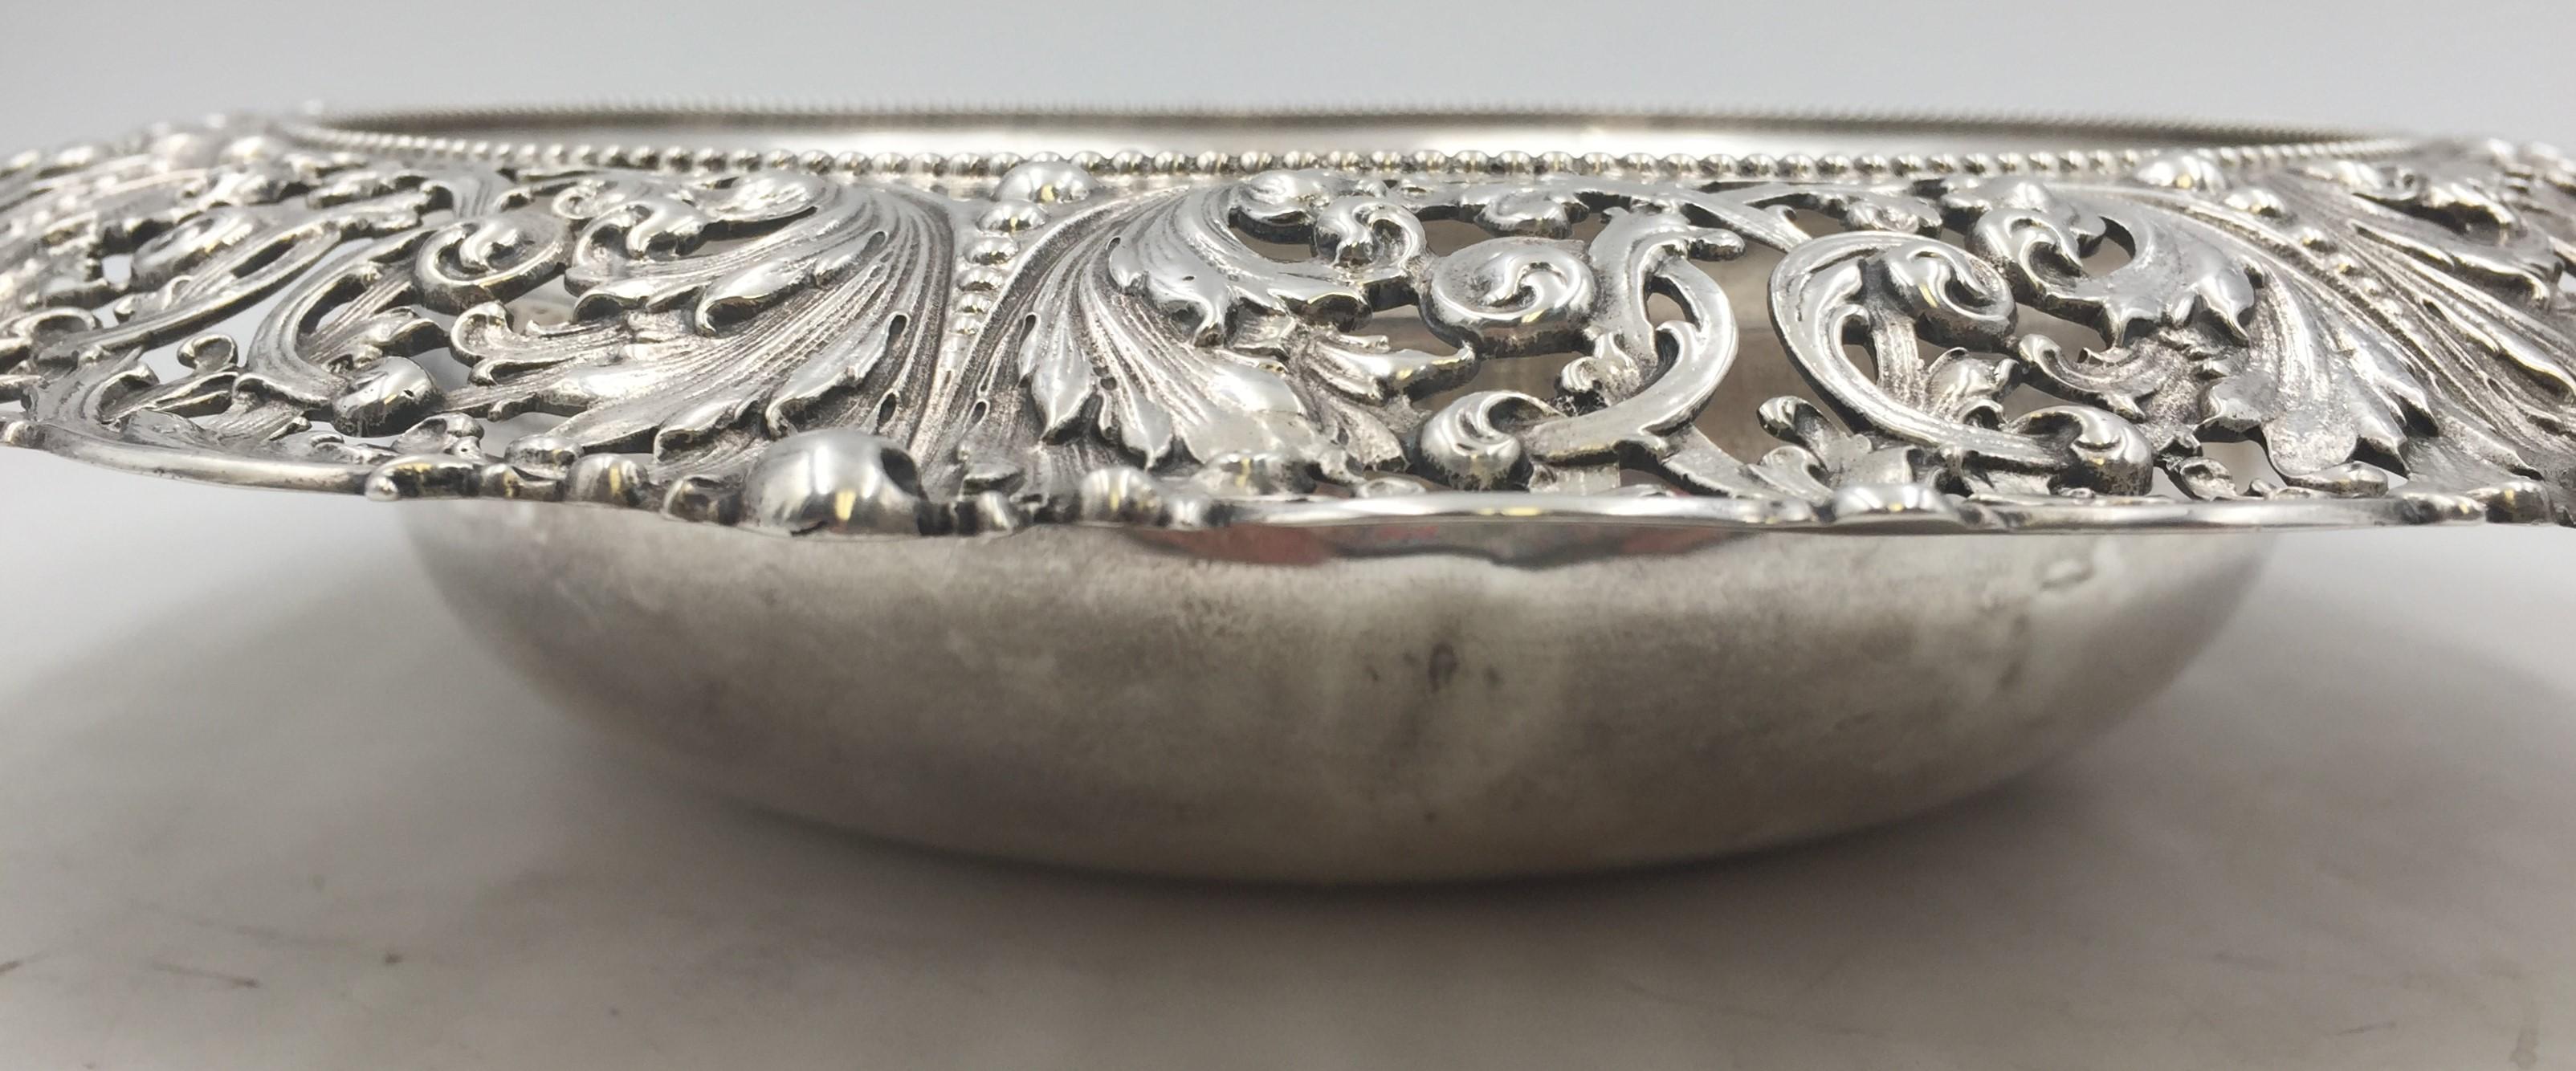 American Marcus & Co. Sterling Silver Centerpiece Bowl